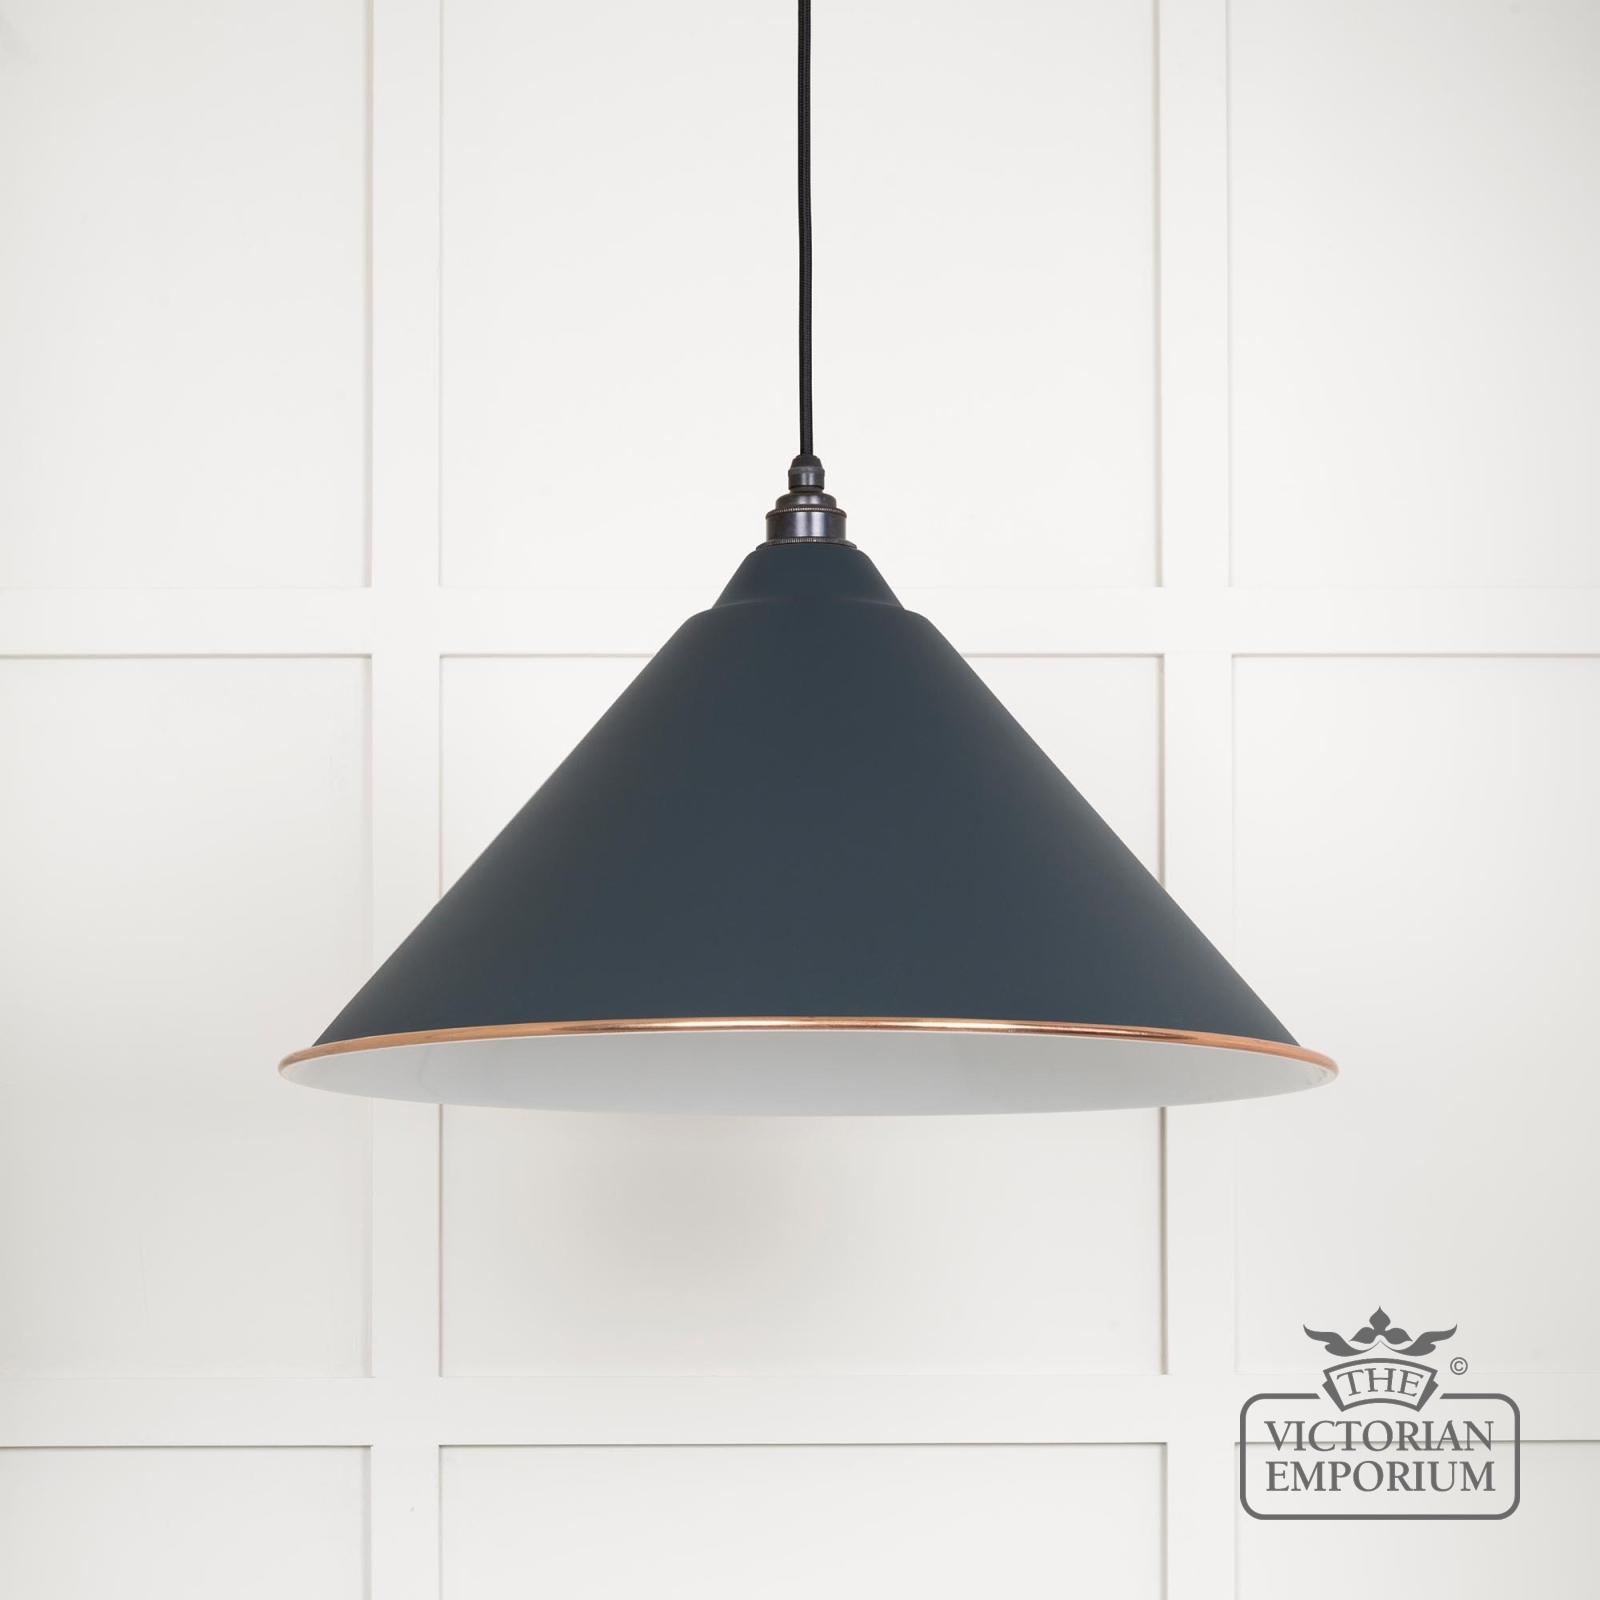 Hockliffe pendant light in Soot and White gloss interior